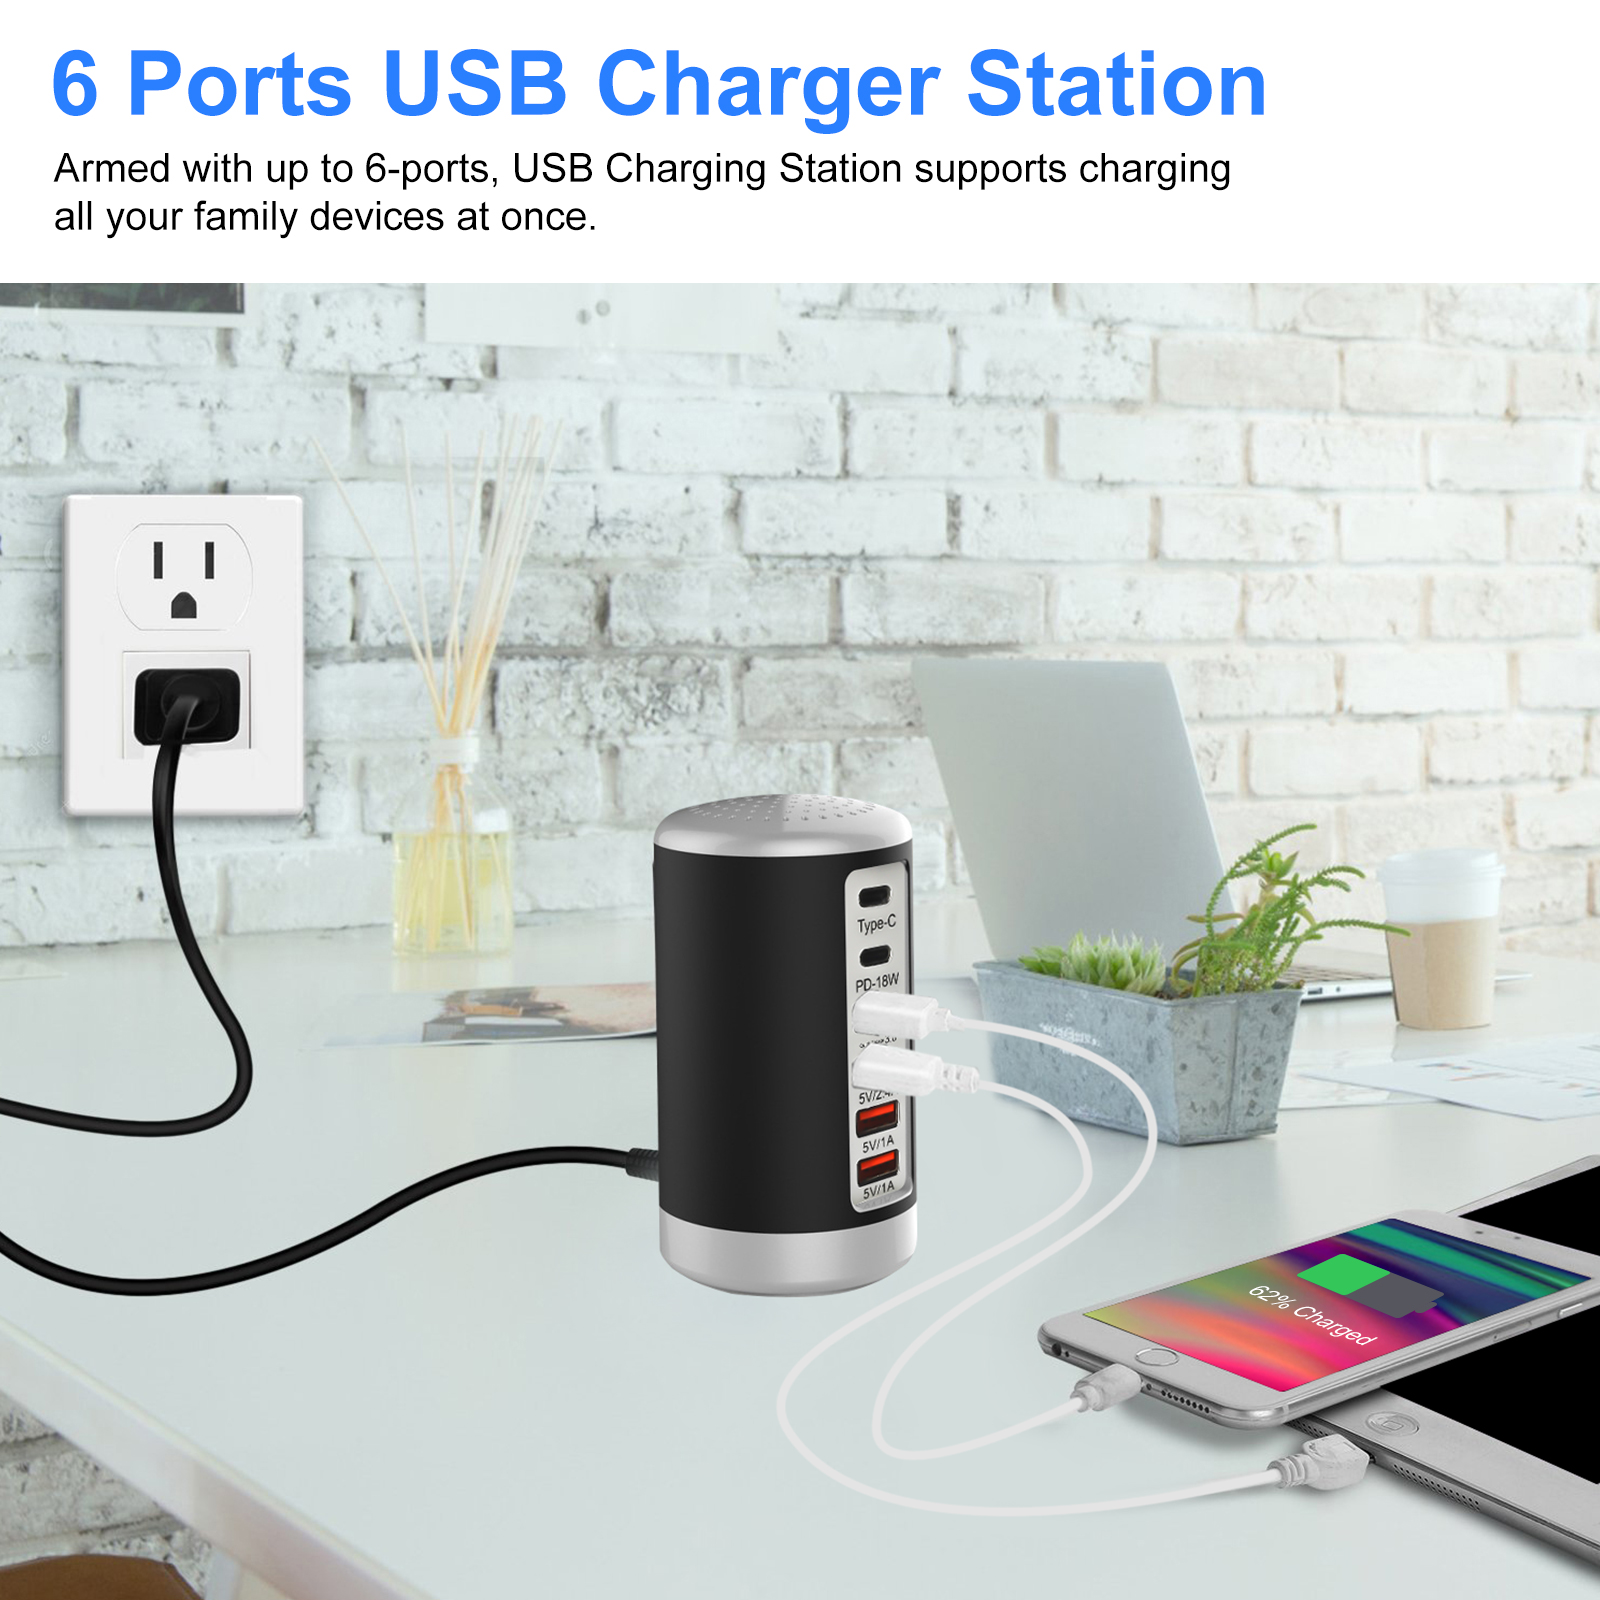 USB Charger, TSV 65W 6 Port Desktop USB Charging Station Hub Wall Charger (3 USB+Type C+QC3.0+PD 18W), Fast Charging Multi-Port Rapid Adapter Compatible with iPad, Smartphones, Tablets - image 2 of 9